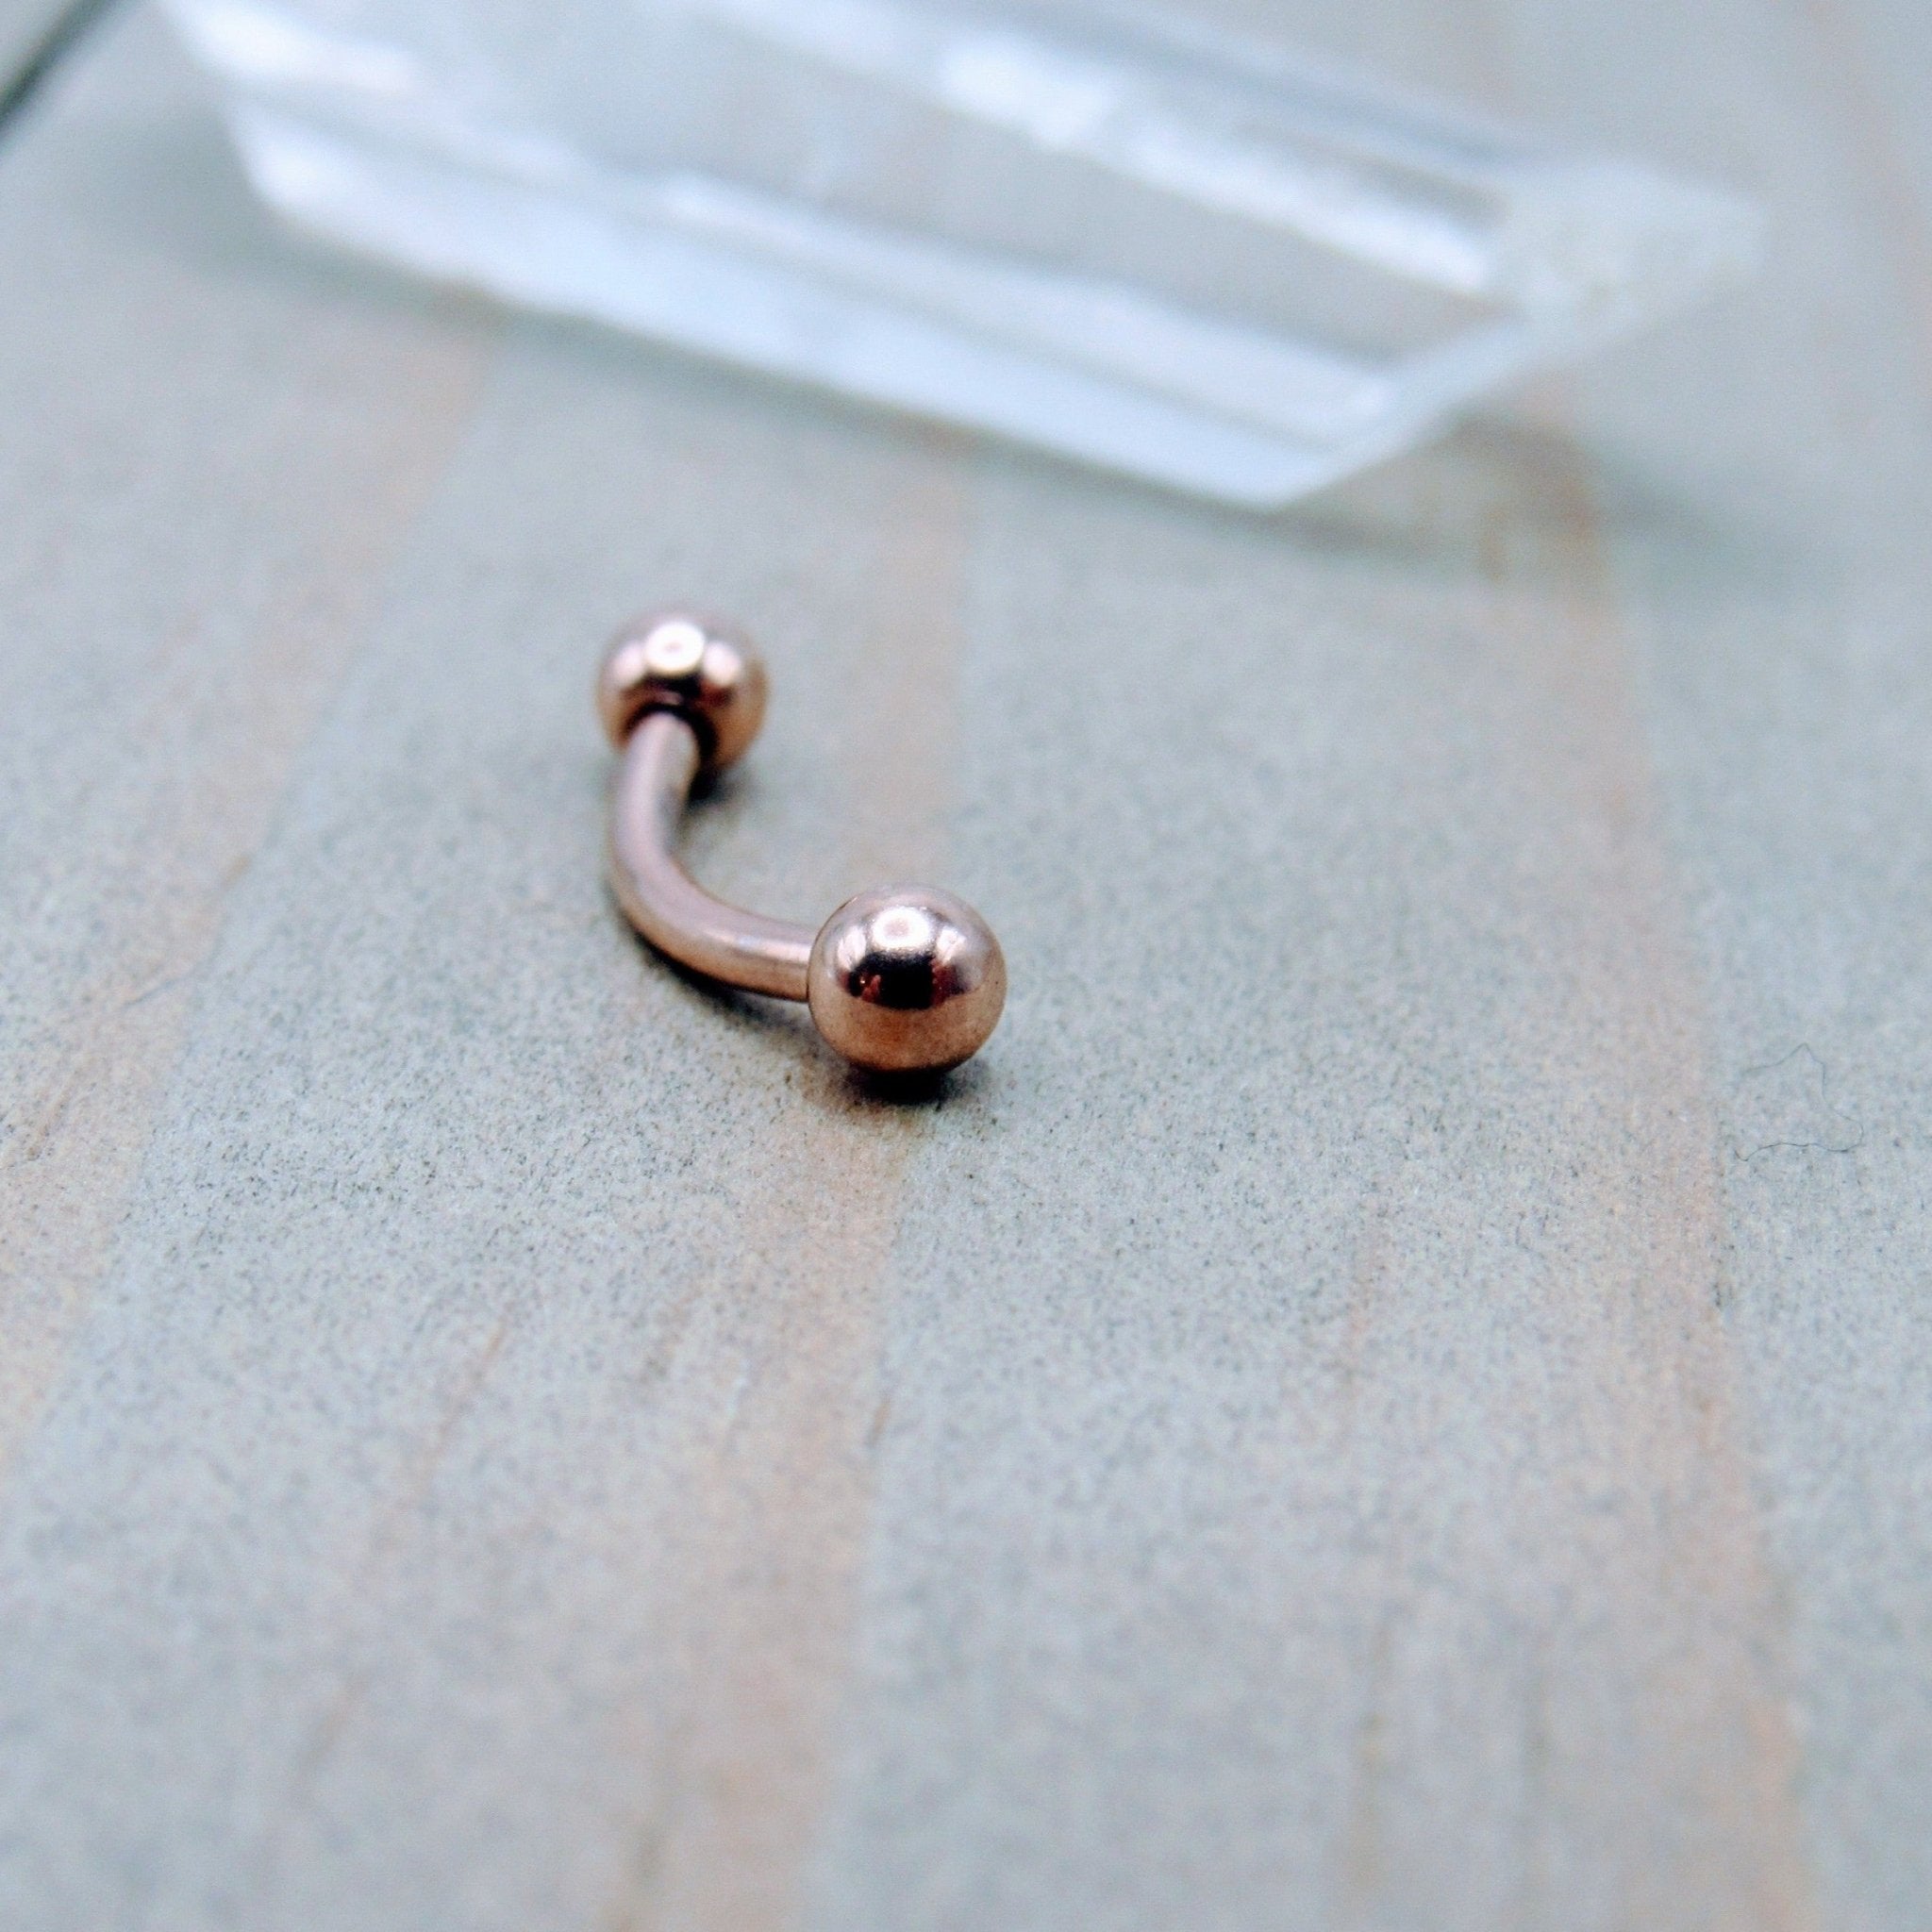 16g Rose gold curved barbell 5/16